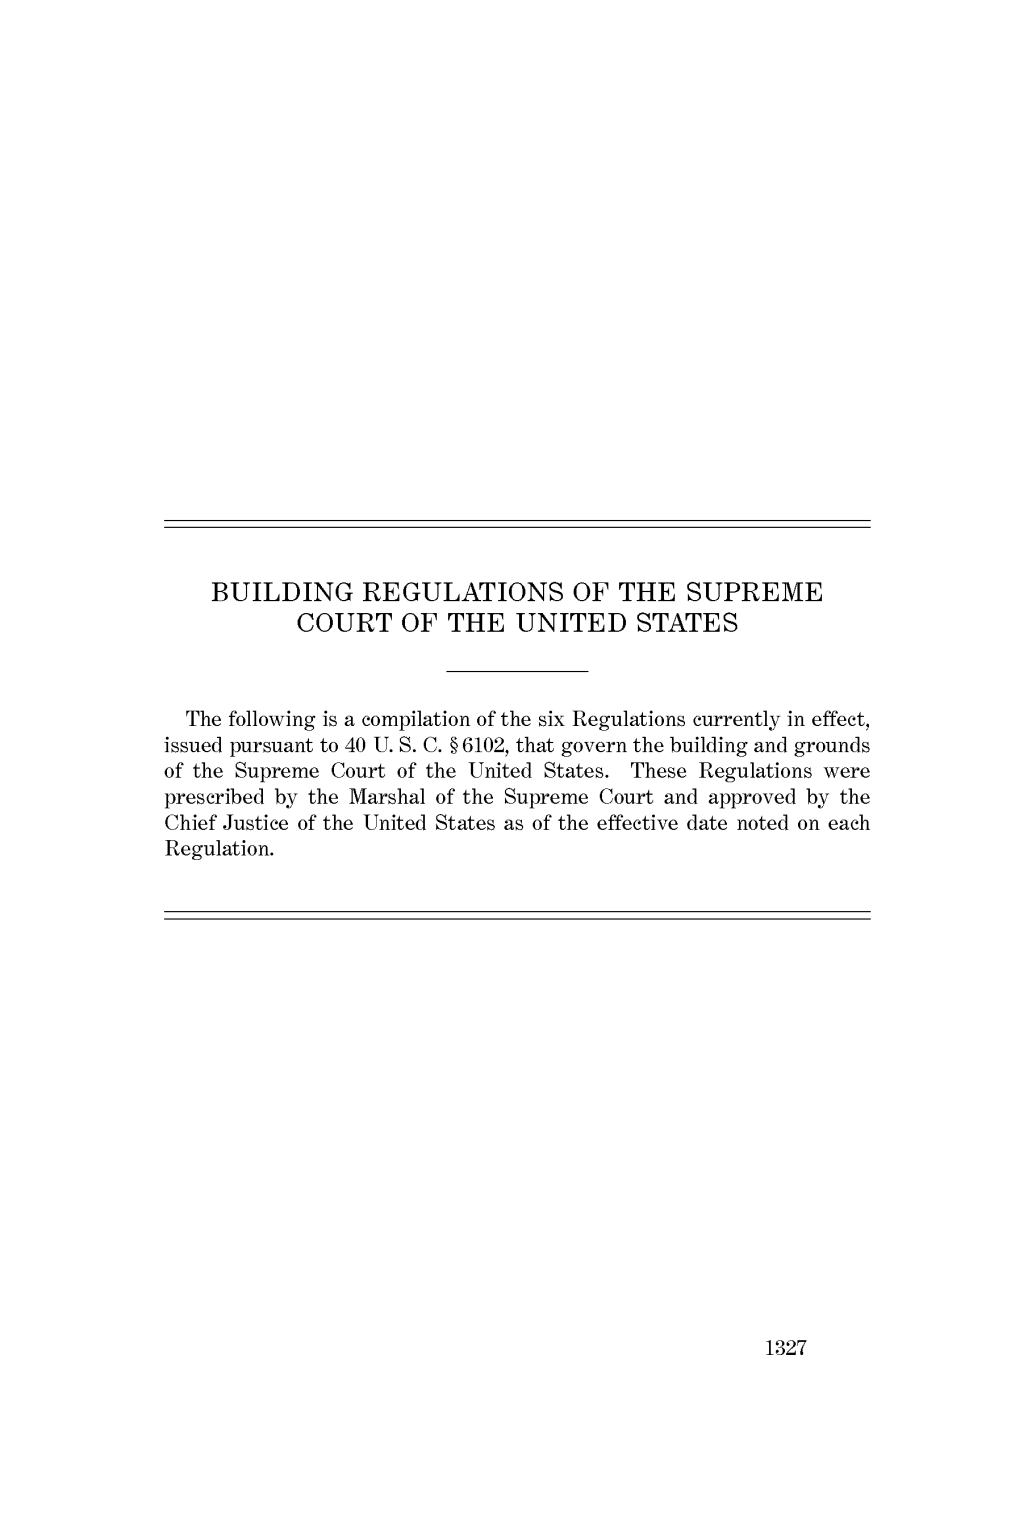 U.S. Reports: Building Regulations of the Supreme Court of the United